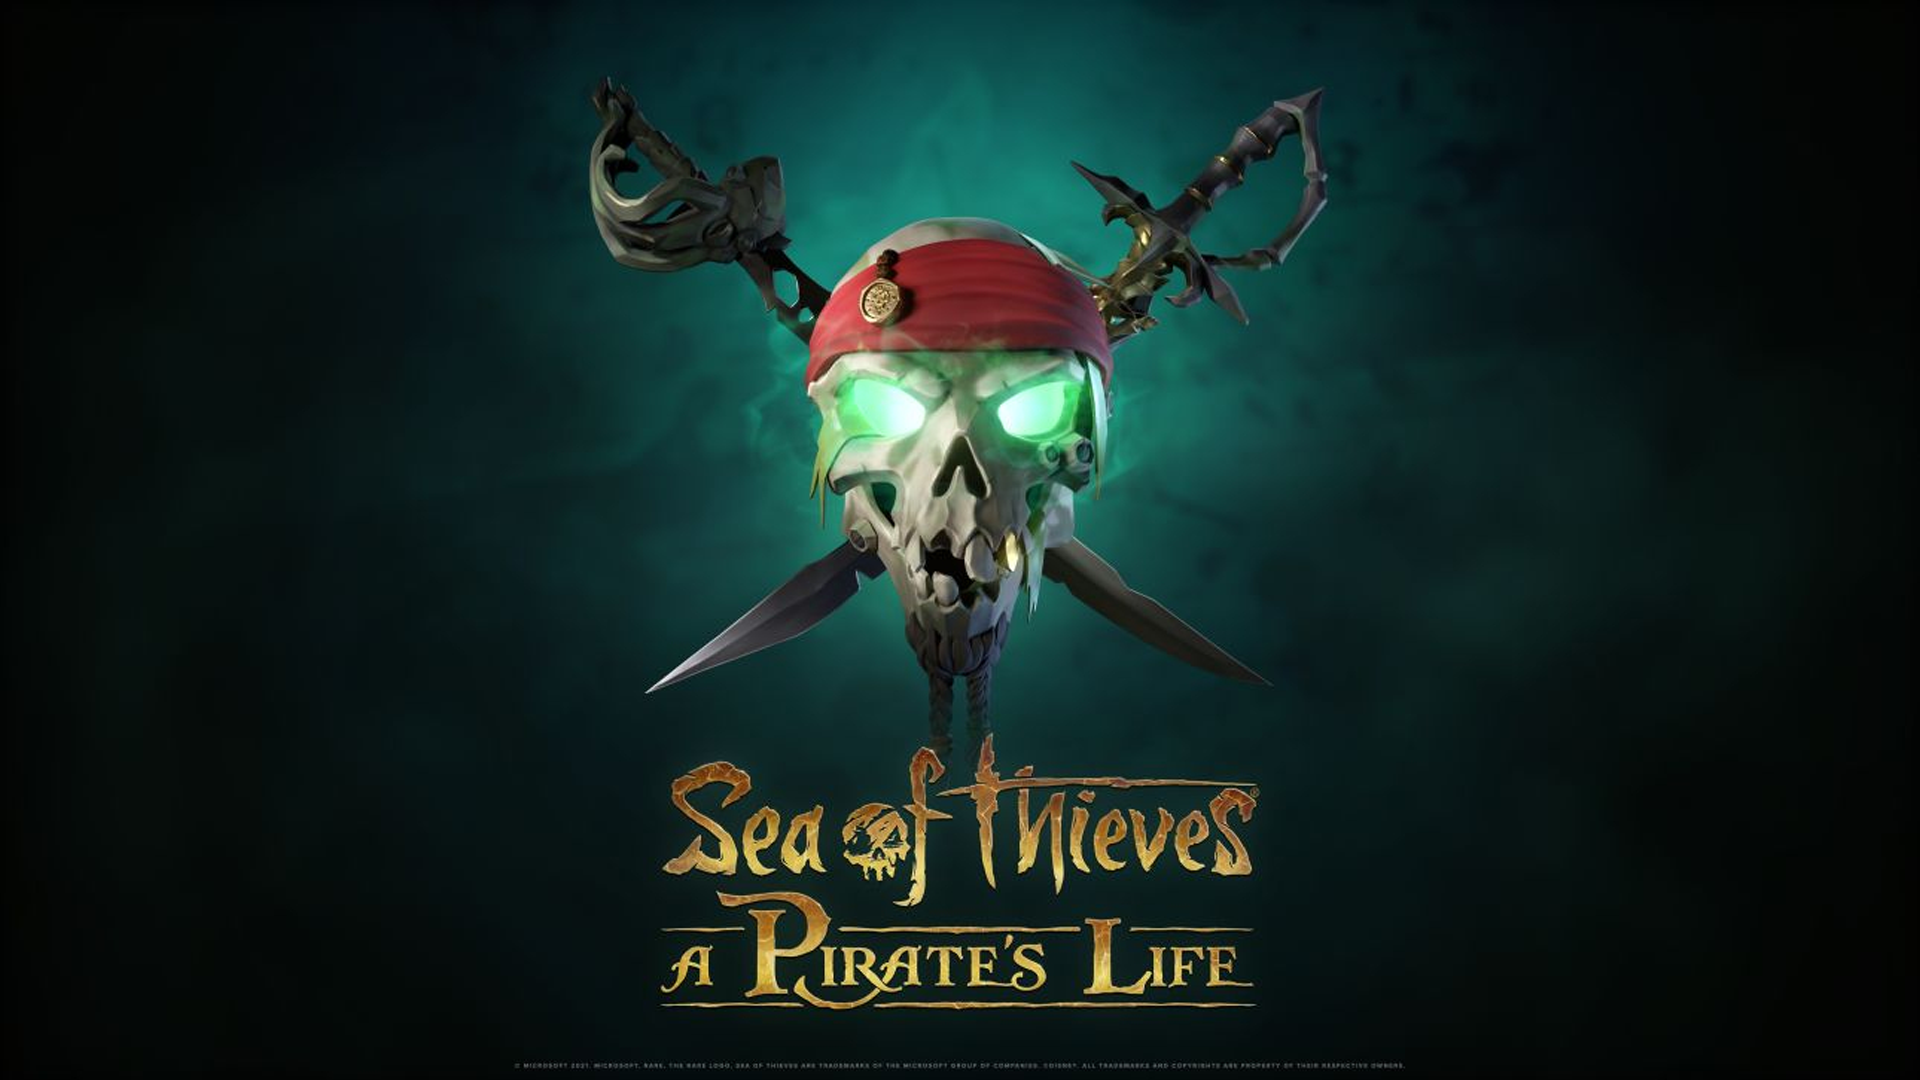 Let’s Play Sea of Thieves: A Pirate’s Life DLC